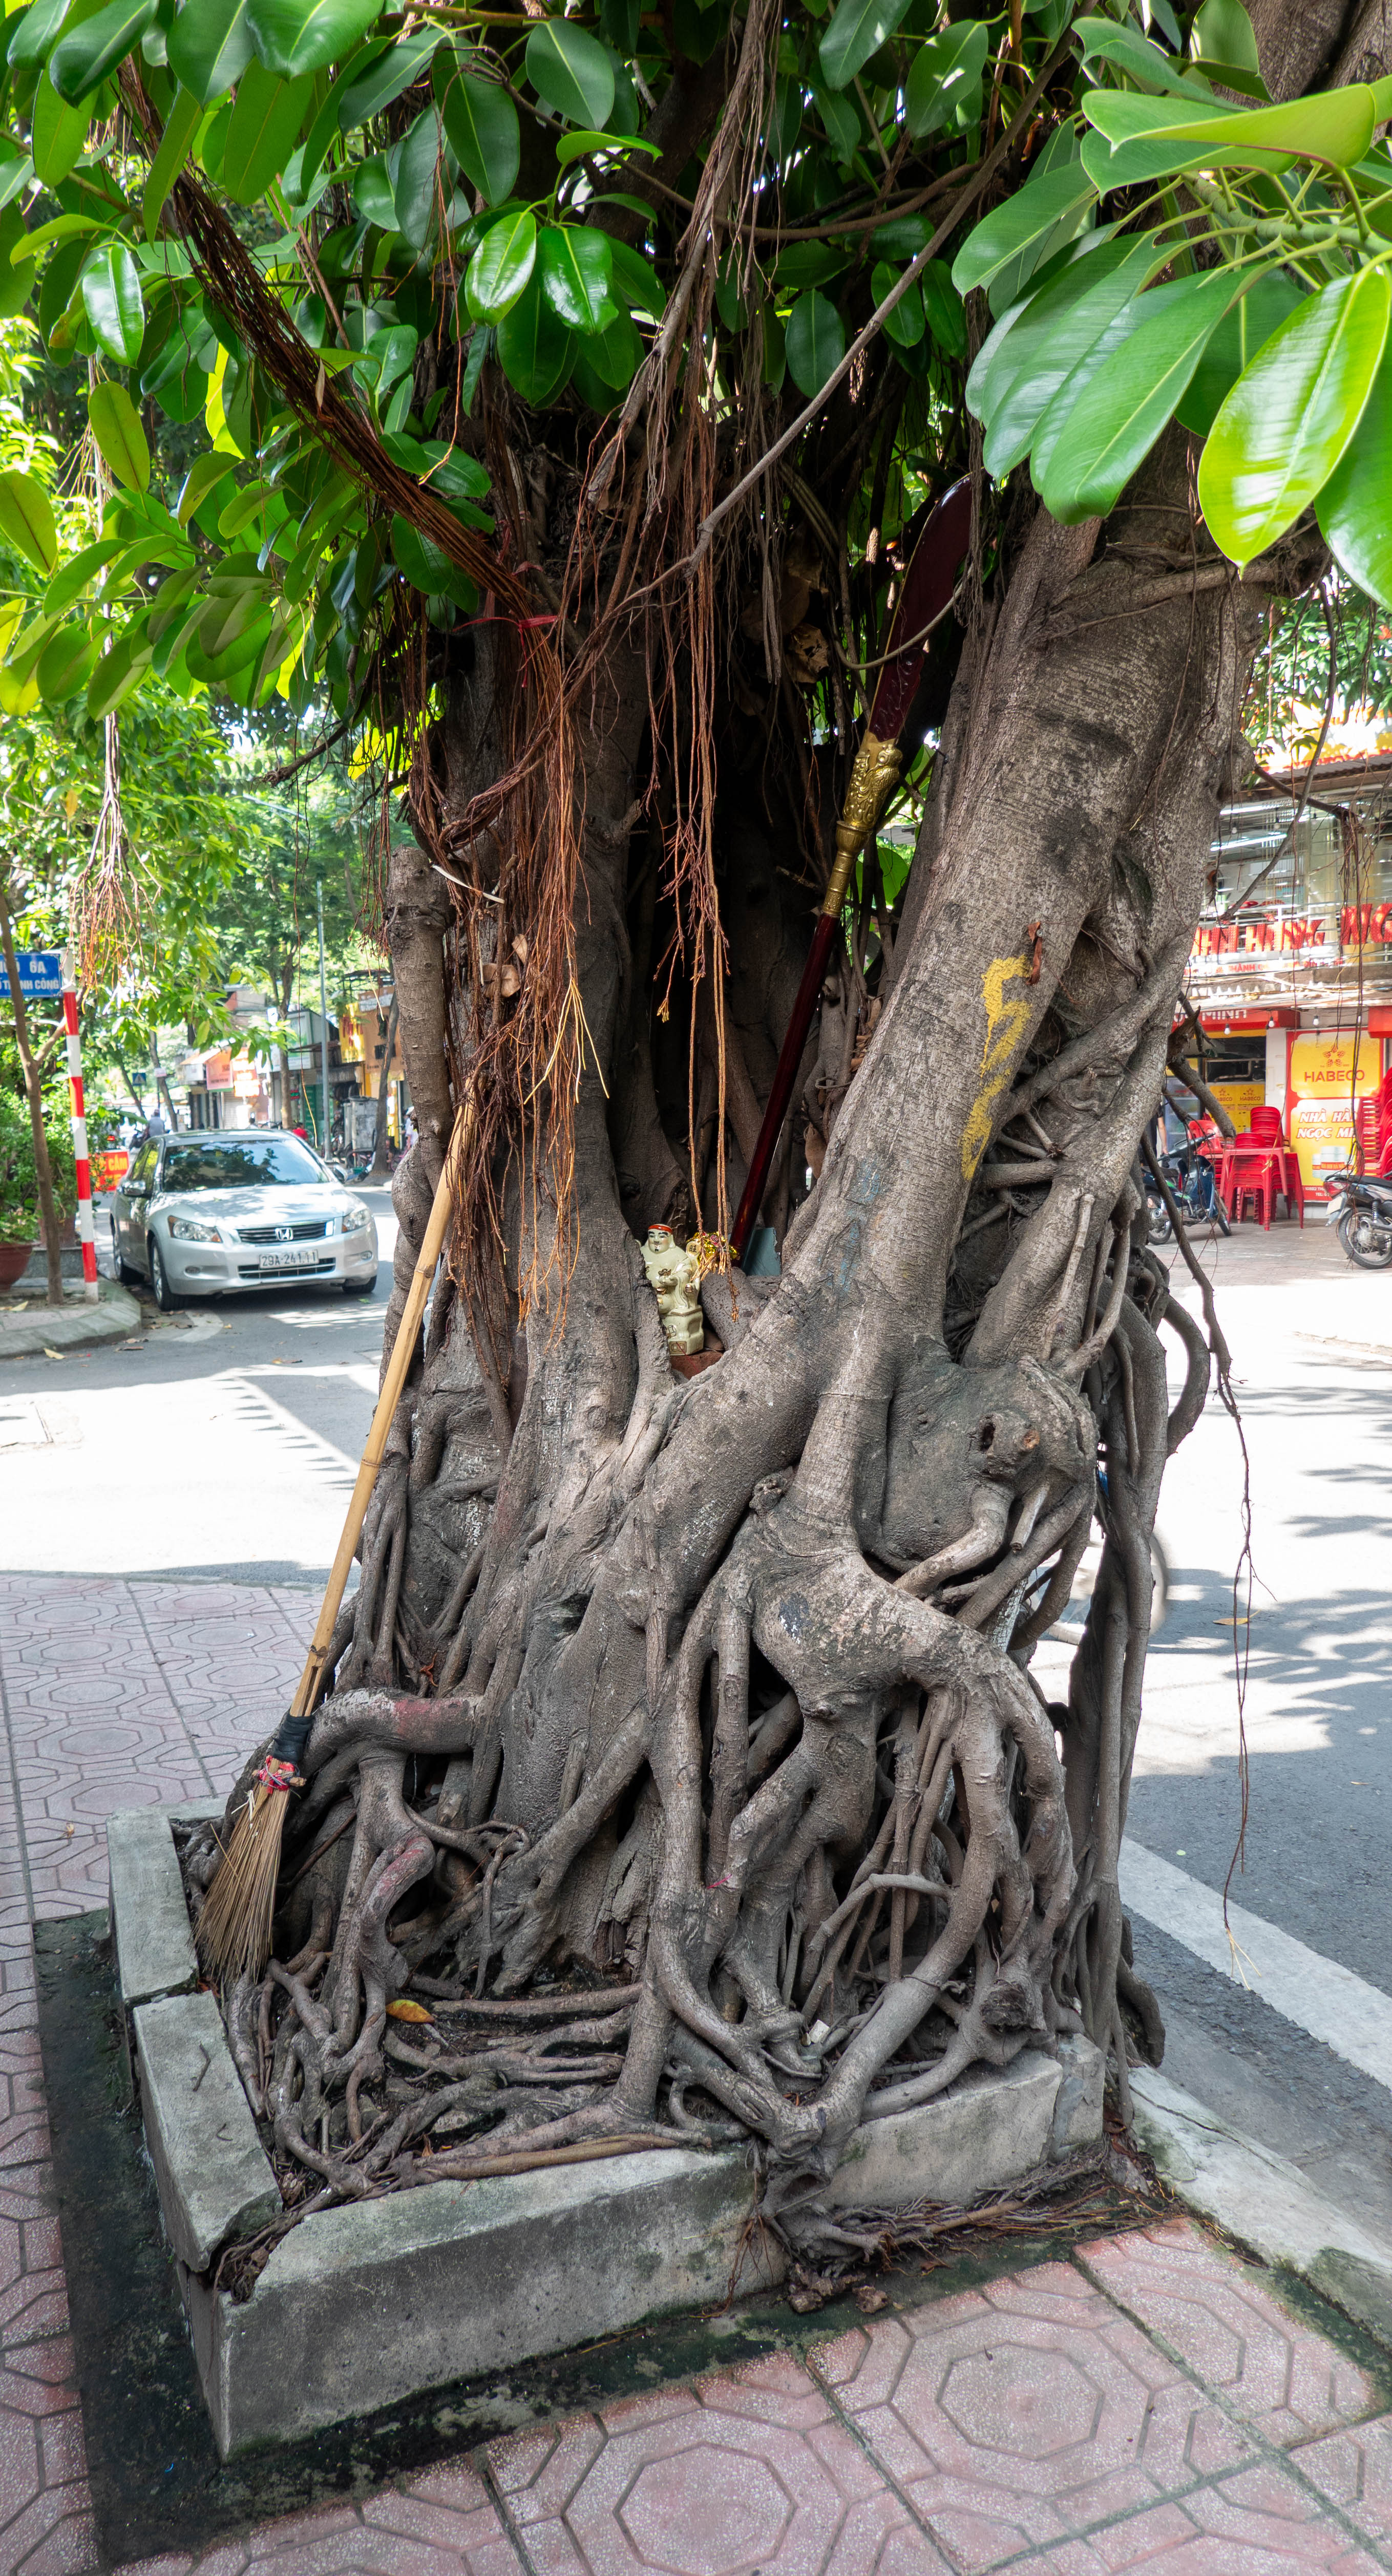 Picture of banyan tree on a sidewalk with small stature in crotch of the tree branches. There is a broom on the left side leaning against the tree.